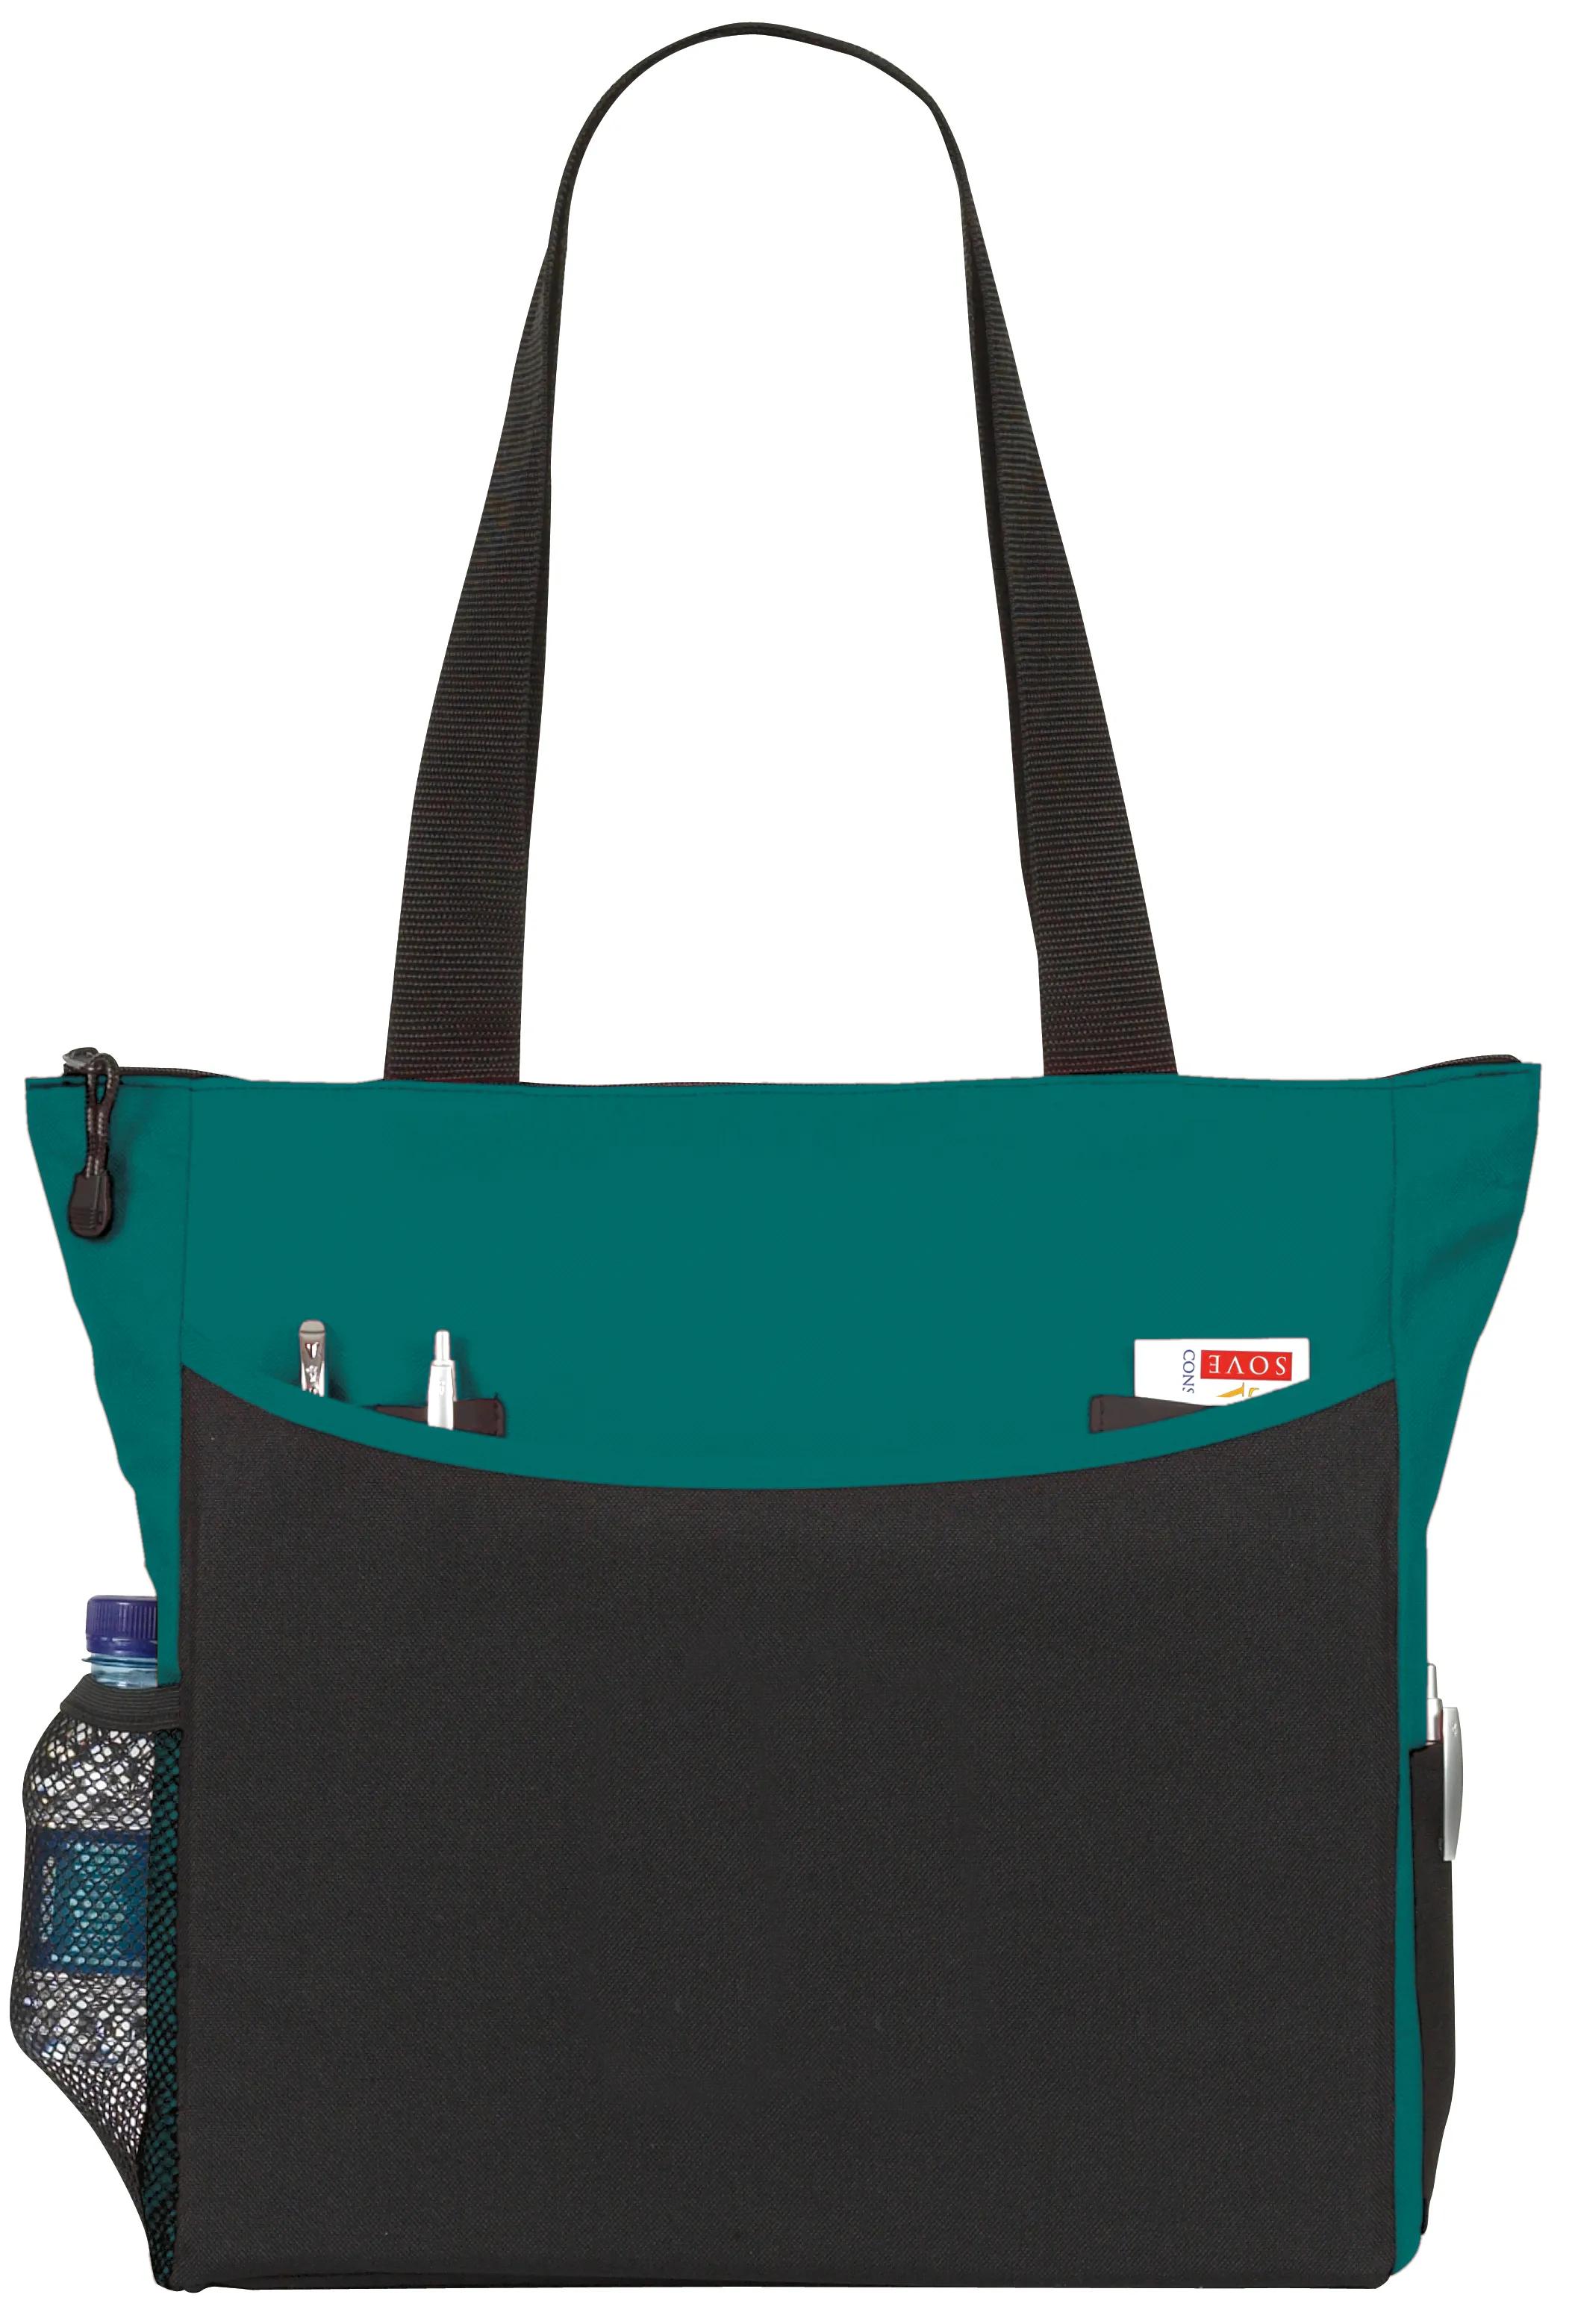 TranSport It Tote 5 of 40